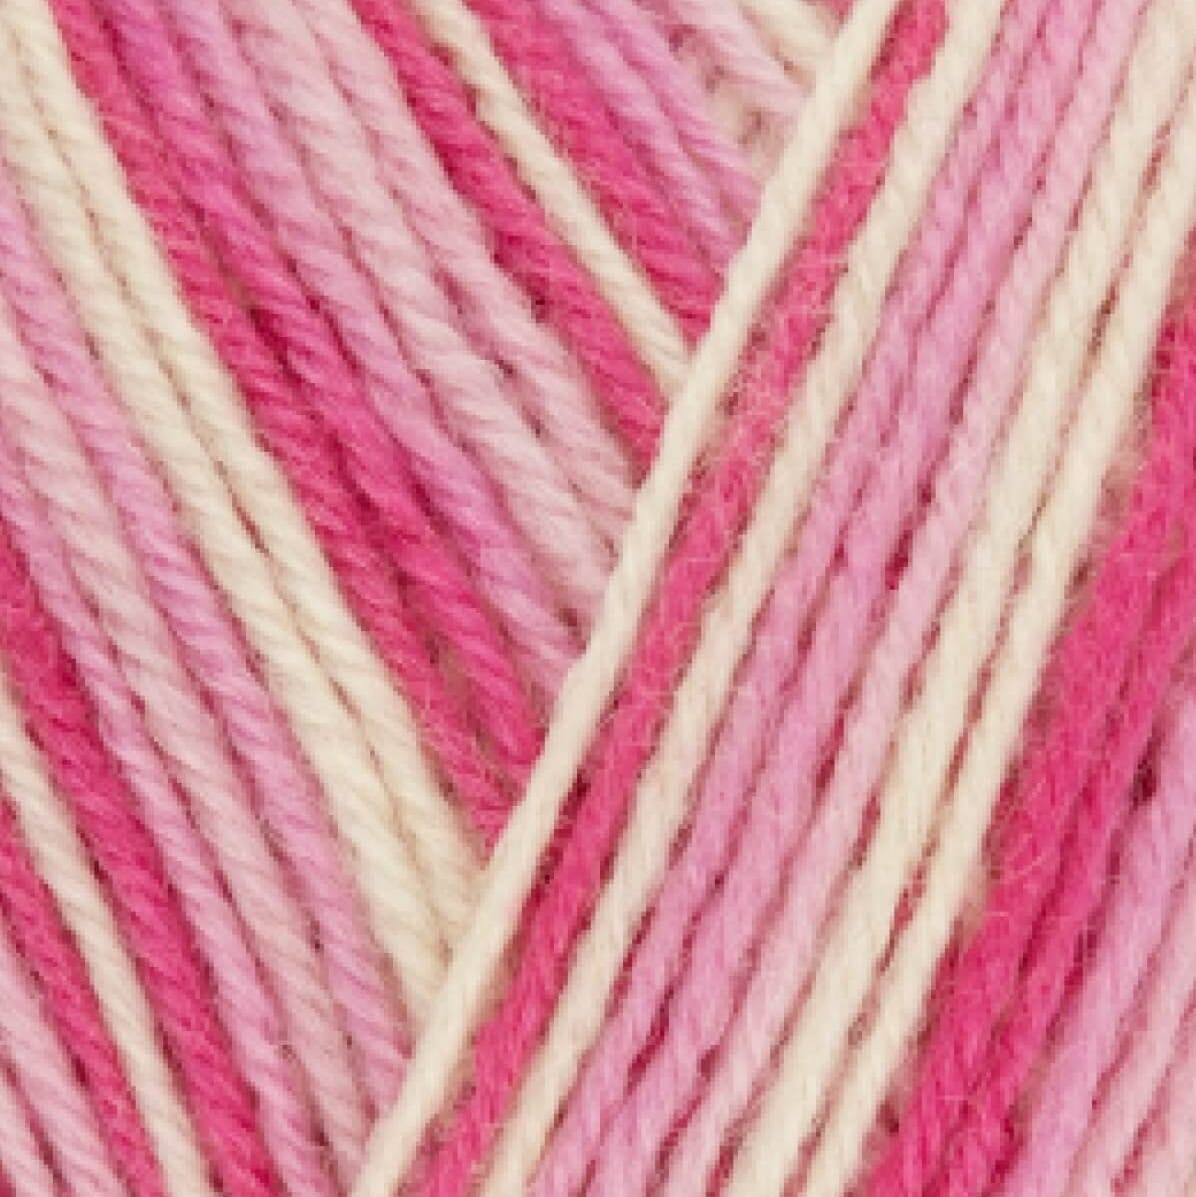 West Yorkshire Spinners The Cocktail Range Signature 4ply - Pink Flamingo 845